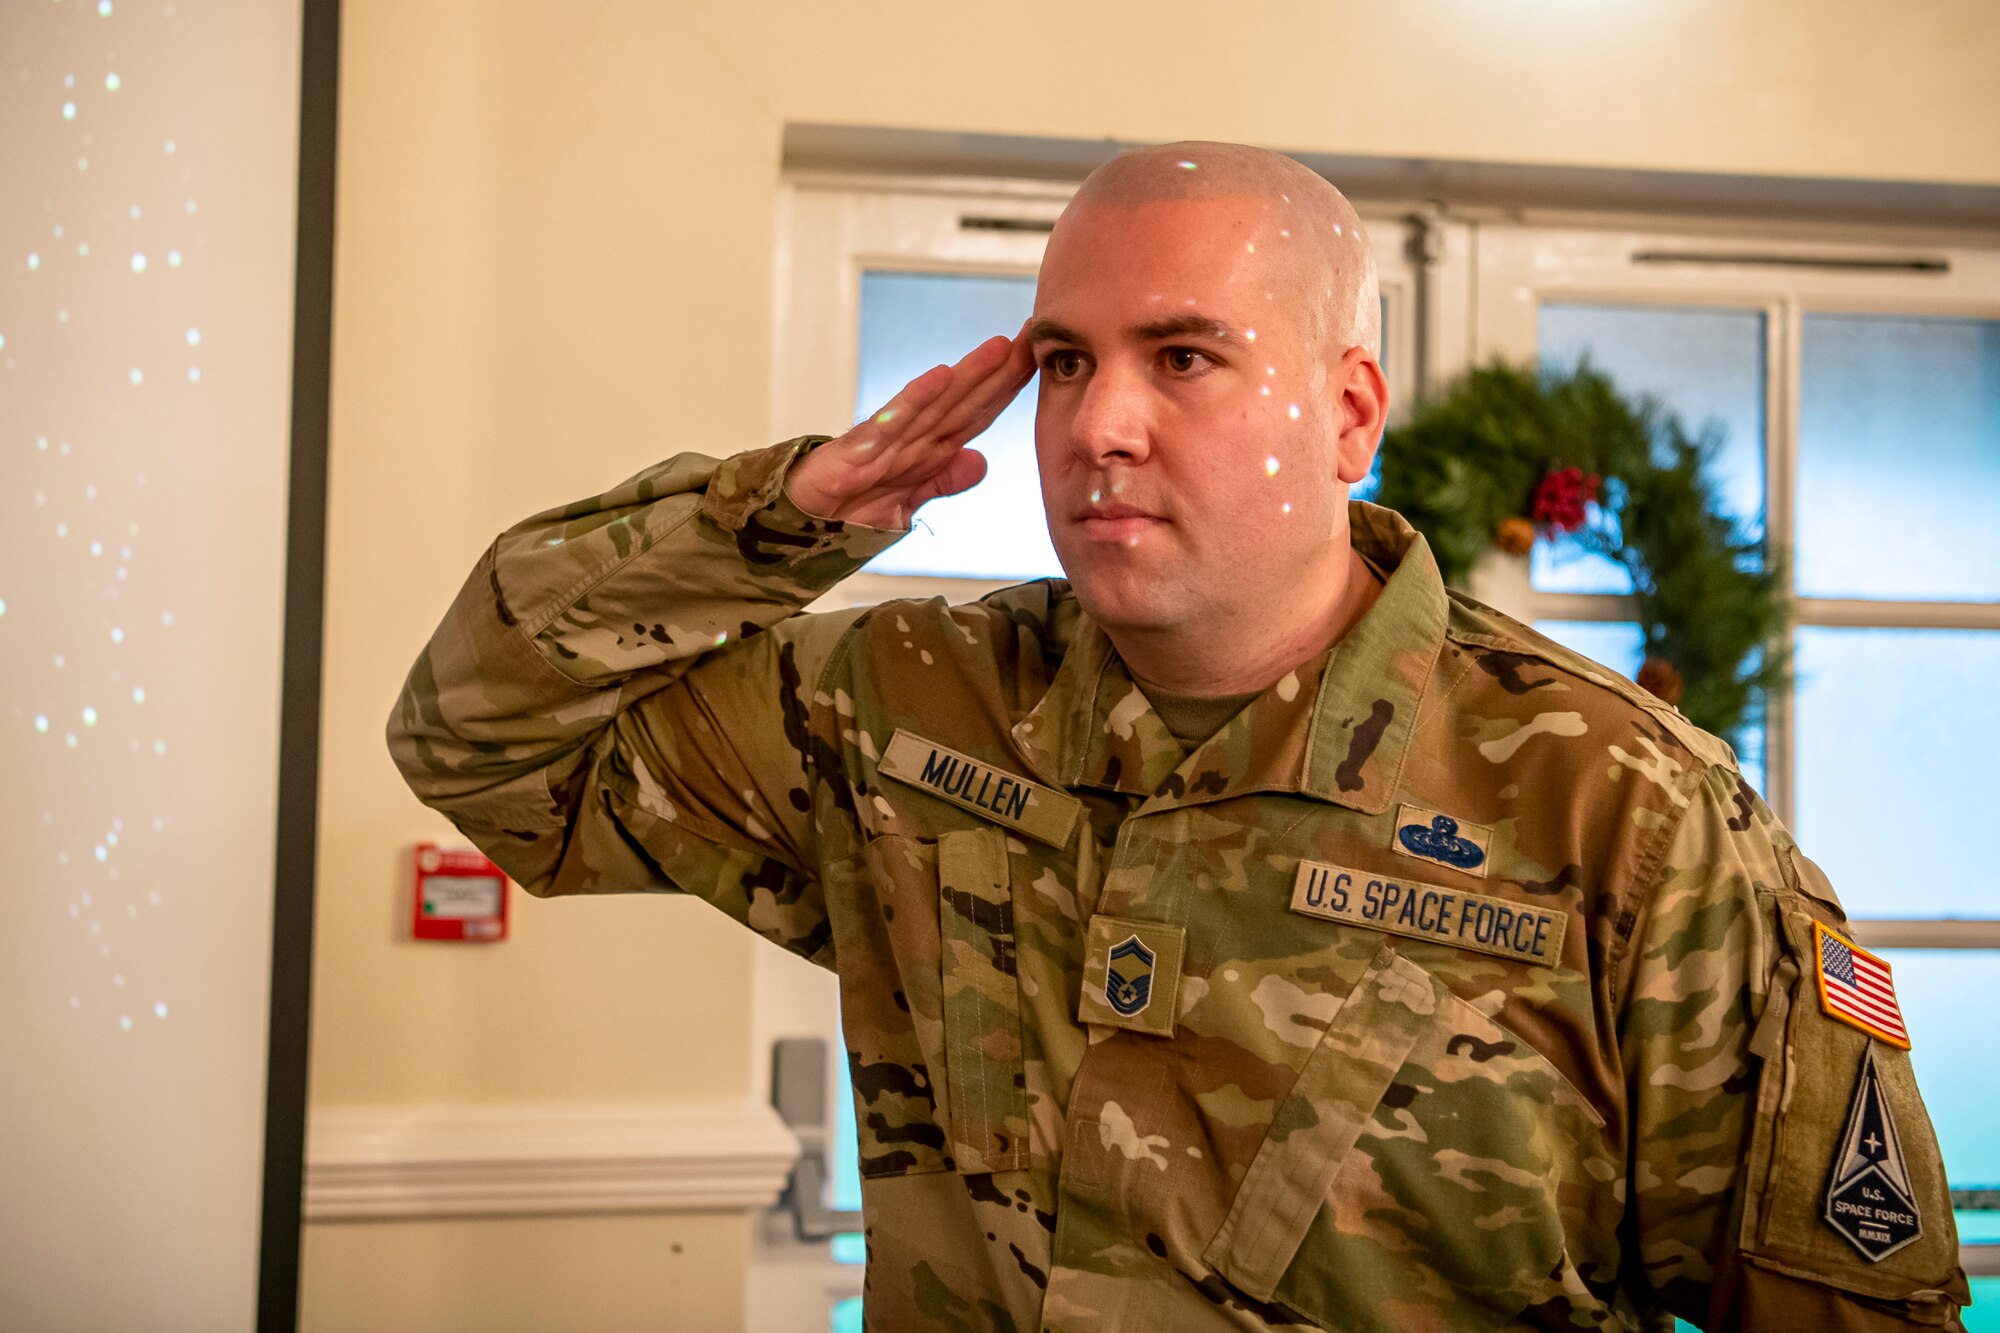 U.S. Air Force Senior Master Sgt. Kyle Mullen, 423rd Communications Squadron superintendent, salutes after taking the oath of enlistment to transition into the United States Space Force at RAF Alconbury, England, Dec. 18, 2020. Mullen became the first Airman from the 501st Combat Support Wing to transition into the USSF. (U.S. Air Force photo by Senior Airman Eugene Oliver)